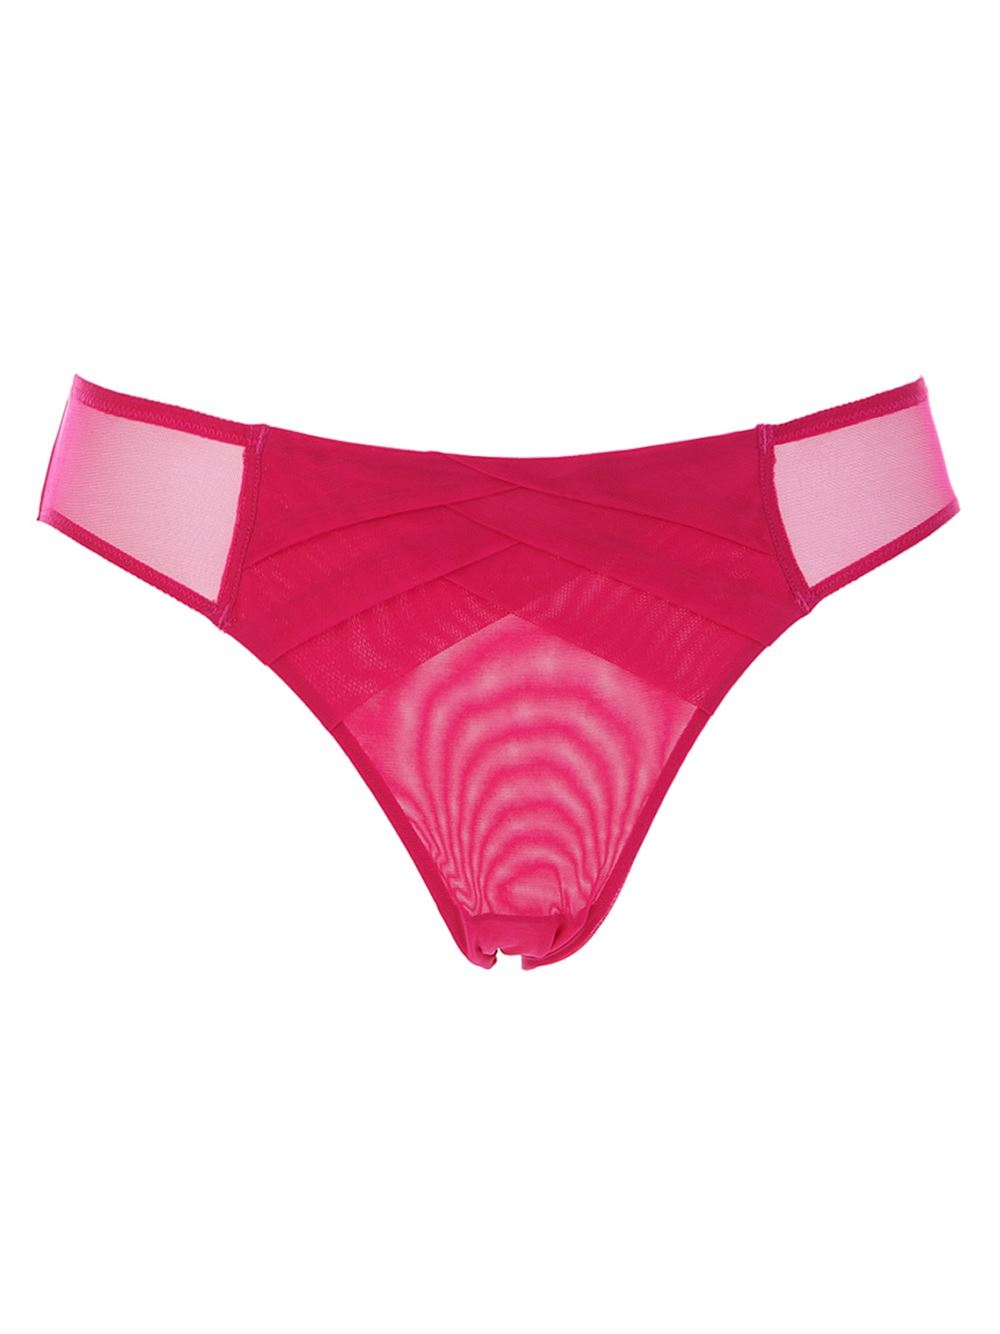 Lyst - Chantal Thomass Encens Moi Briefs in Pink